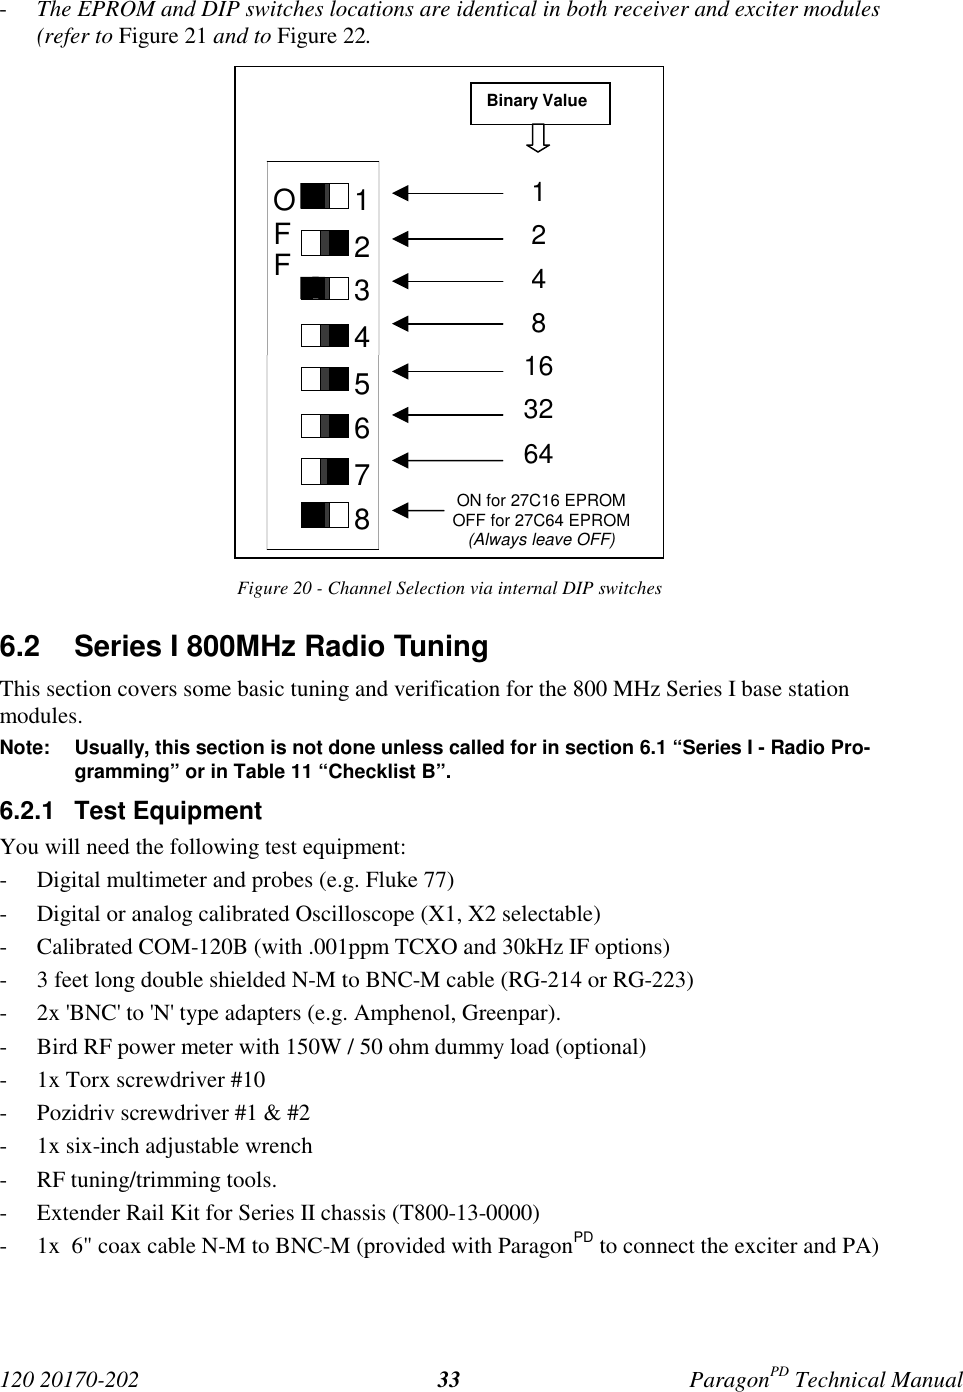 120 20170-202 ParagonPD Technical Manual33- The EPROM and DIP switches locations are identical in both receiver and exciter modules(refer to Figure 21 and to Figure 22.Figure 20 - Channel Selection via internal DIP switches6.2  Series I 800MHz Radio TuningThis section covers some basic tuning and verification for the 800 MHz Series I base stationmodules.Note: Usually, this section is not done unless called for in section 6.1 “Series I - Radio Pro-gramming” or in Table 11 “Checklist B”.6.2.1 Test EquipmentYou will need the following test equipment:- Digital multimeter and probes (e.g. Fluke 77)- Digital or analog calibrated Oscilloscope (X1, X2 selectable)- Calibrated COM-120B (with .001ppm TCXO and 30kHz IF options)- 3 feet long double shielded N-M to BNC-M cable (RG-214 or RG-223)- 2x &apos;BNC&apos; to &apos;N&apos; type adapters (e.g. Amphenol, Greenpar).- Bird RF power meter with 150W / 50 ohm dummy load (optional)- 1x Torx screwdriver #10- Pozidriv screwdriver #1 &amp; #2- 1x six-inch adjustable wrench- RF tuning/trimming tools.- Extender Rail Kit for Series II chassis (T800-13-0000)- 1x  6&quot; coax cable N-M to BNC-M (provided with ParagonPD to connect the exciter and PA)12345678OFFBinary Value1248163264ON for 27C16 EPROMOFF for 27C64 EPROM(Always leave OFF)